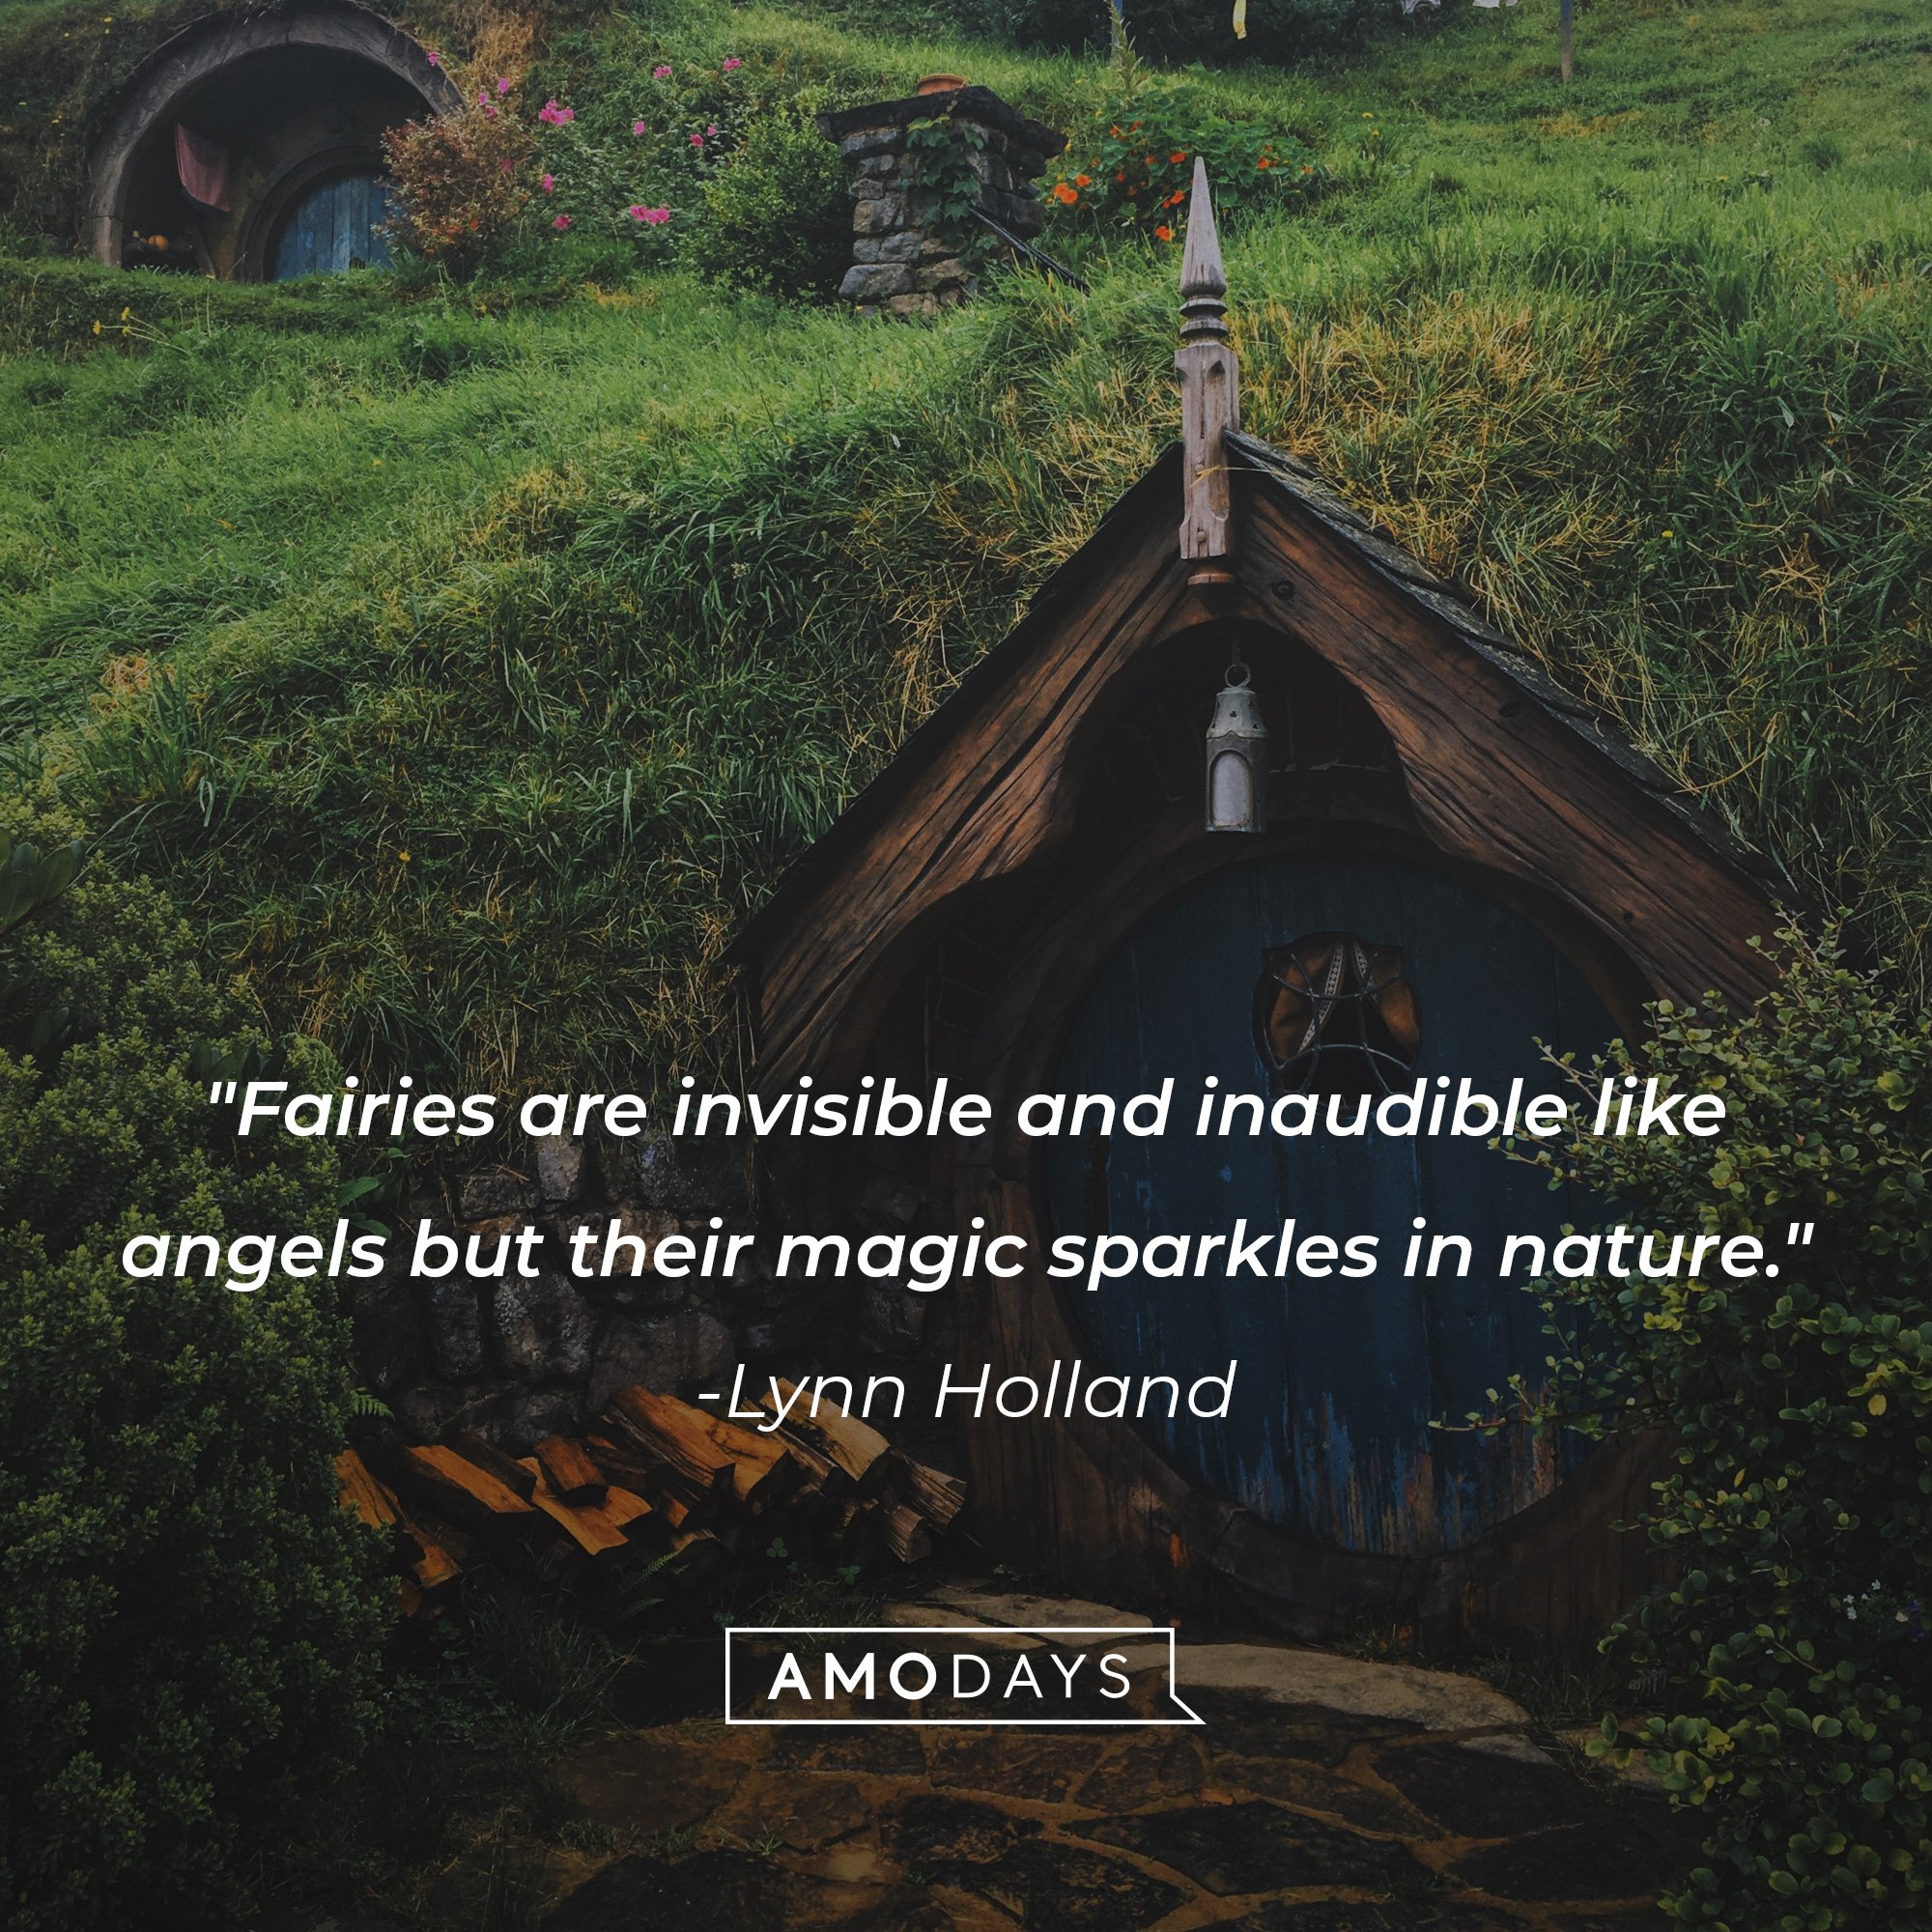 Lynn Holland's quote: "Fairies are invisible and inaudible like angels but their magic sparkles in nature." | Image: Amo Days